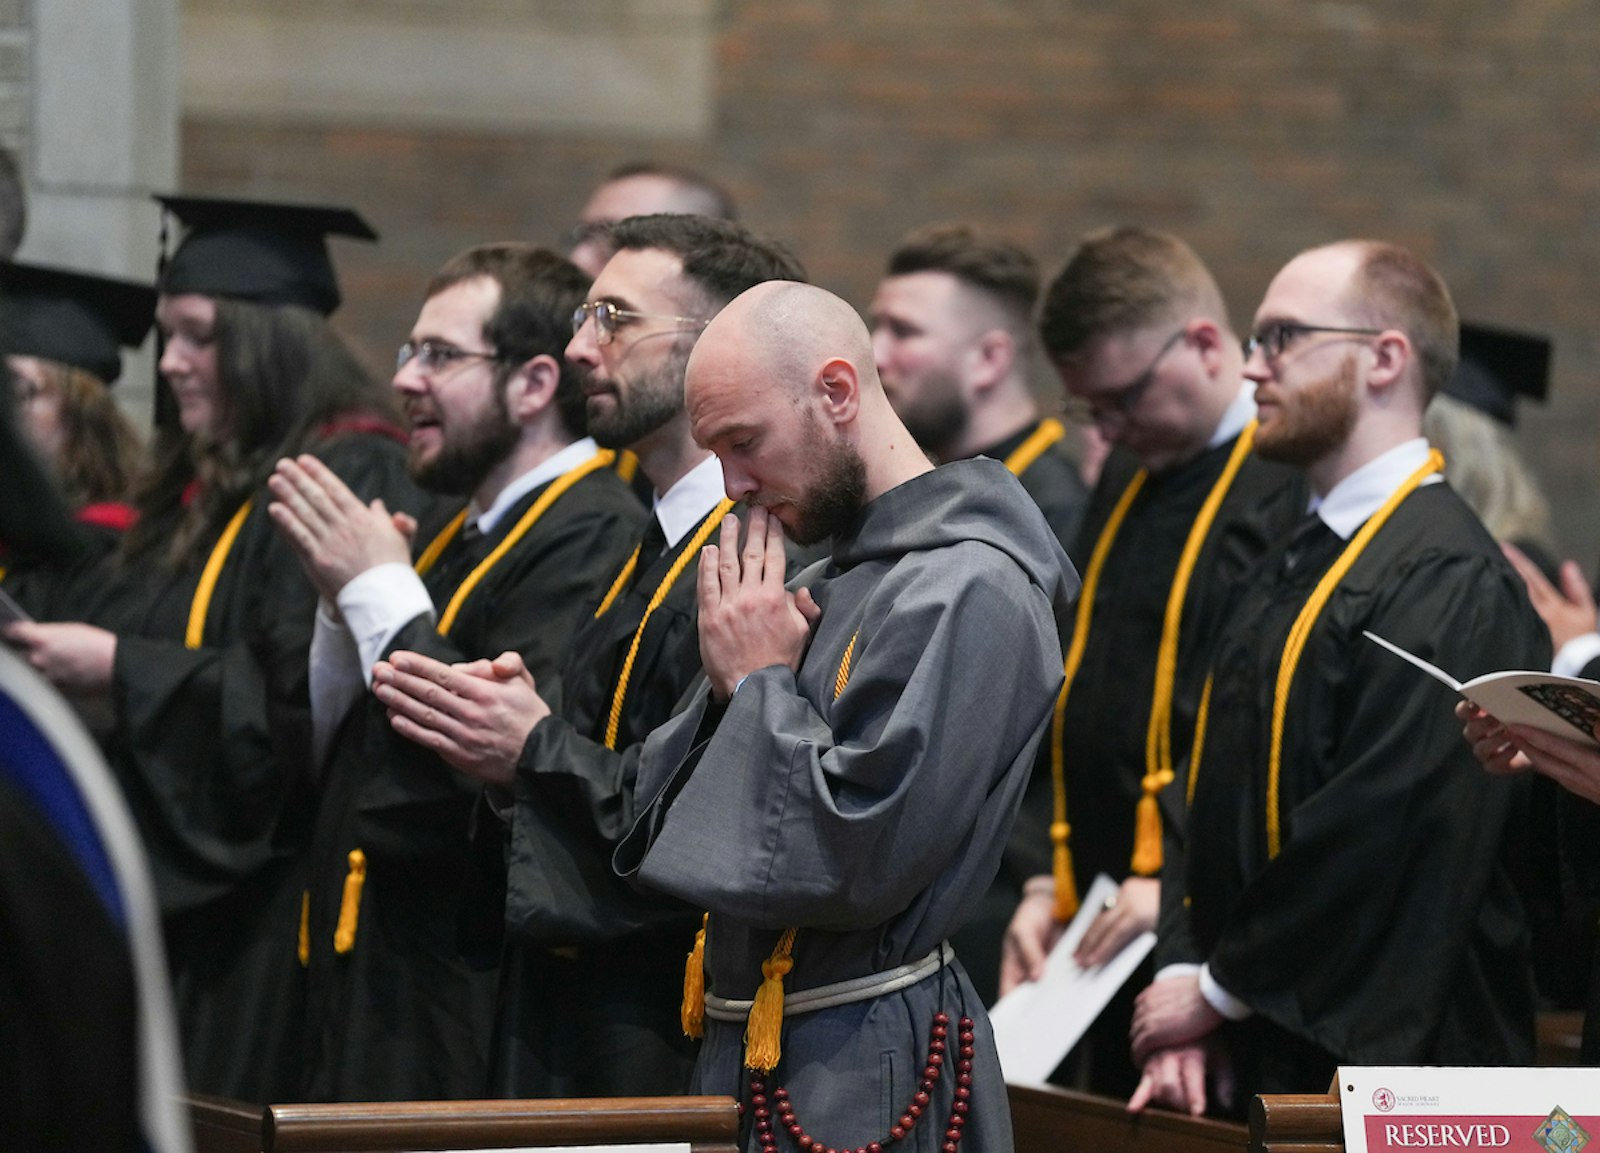 Fr. Mabee said it was up to the graduates to take Christ’s presence at Sacred Heart Major Seminary out into the world and use the lessons they learned at the school to become vehicles for the New Evangelization.